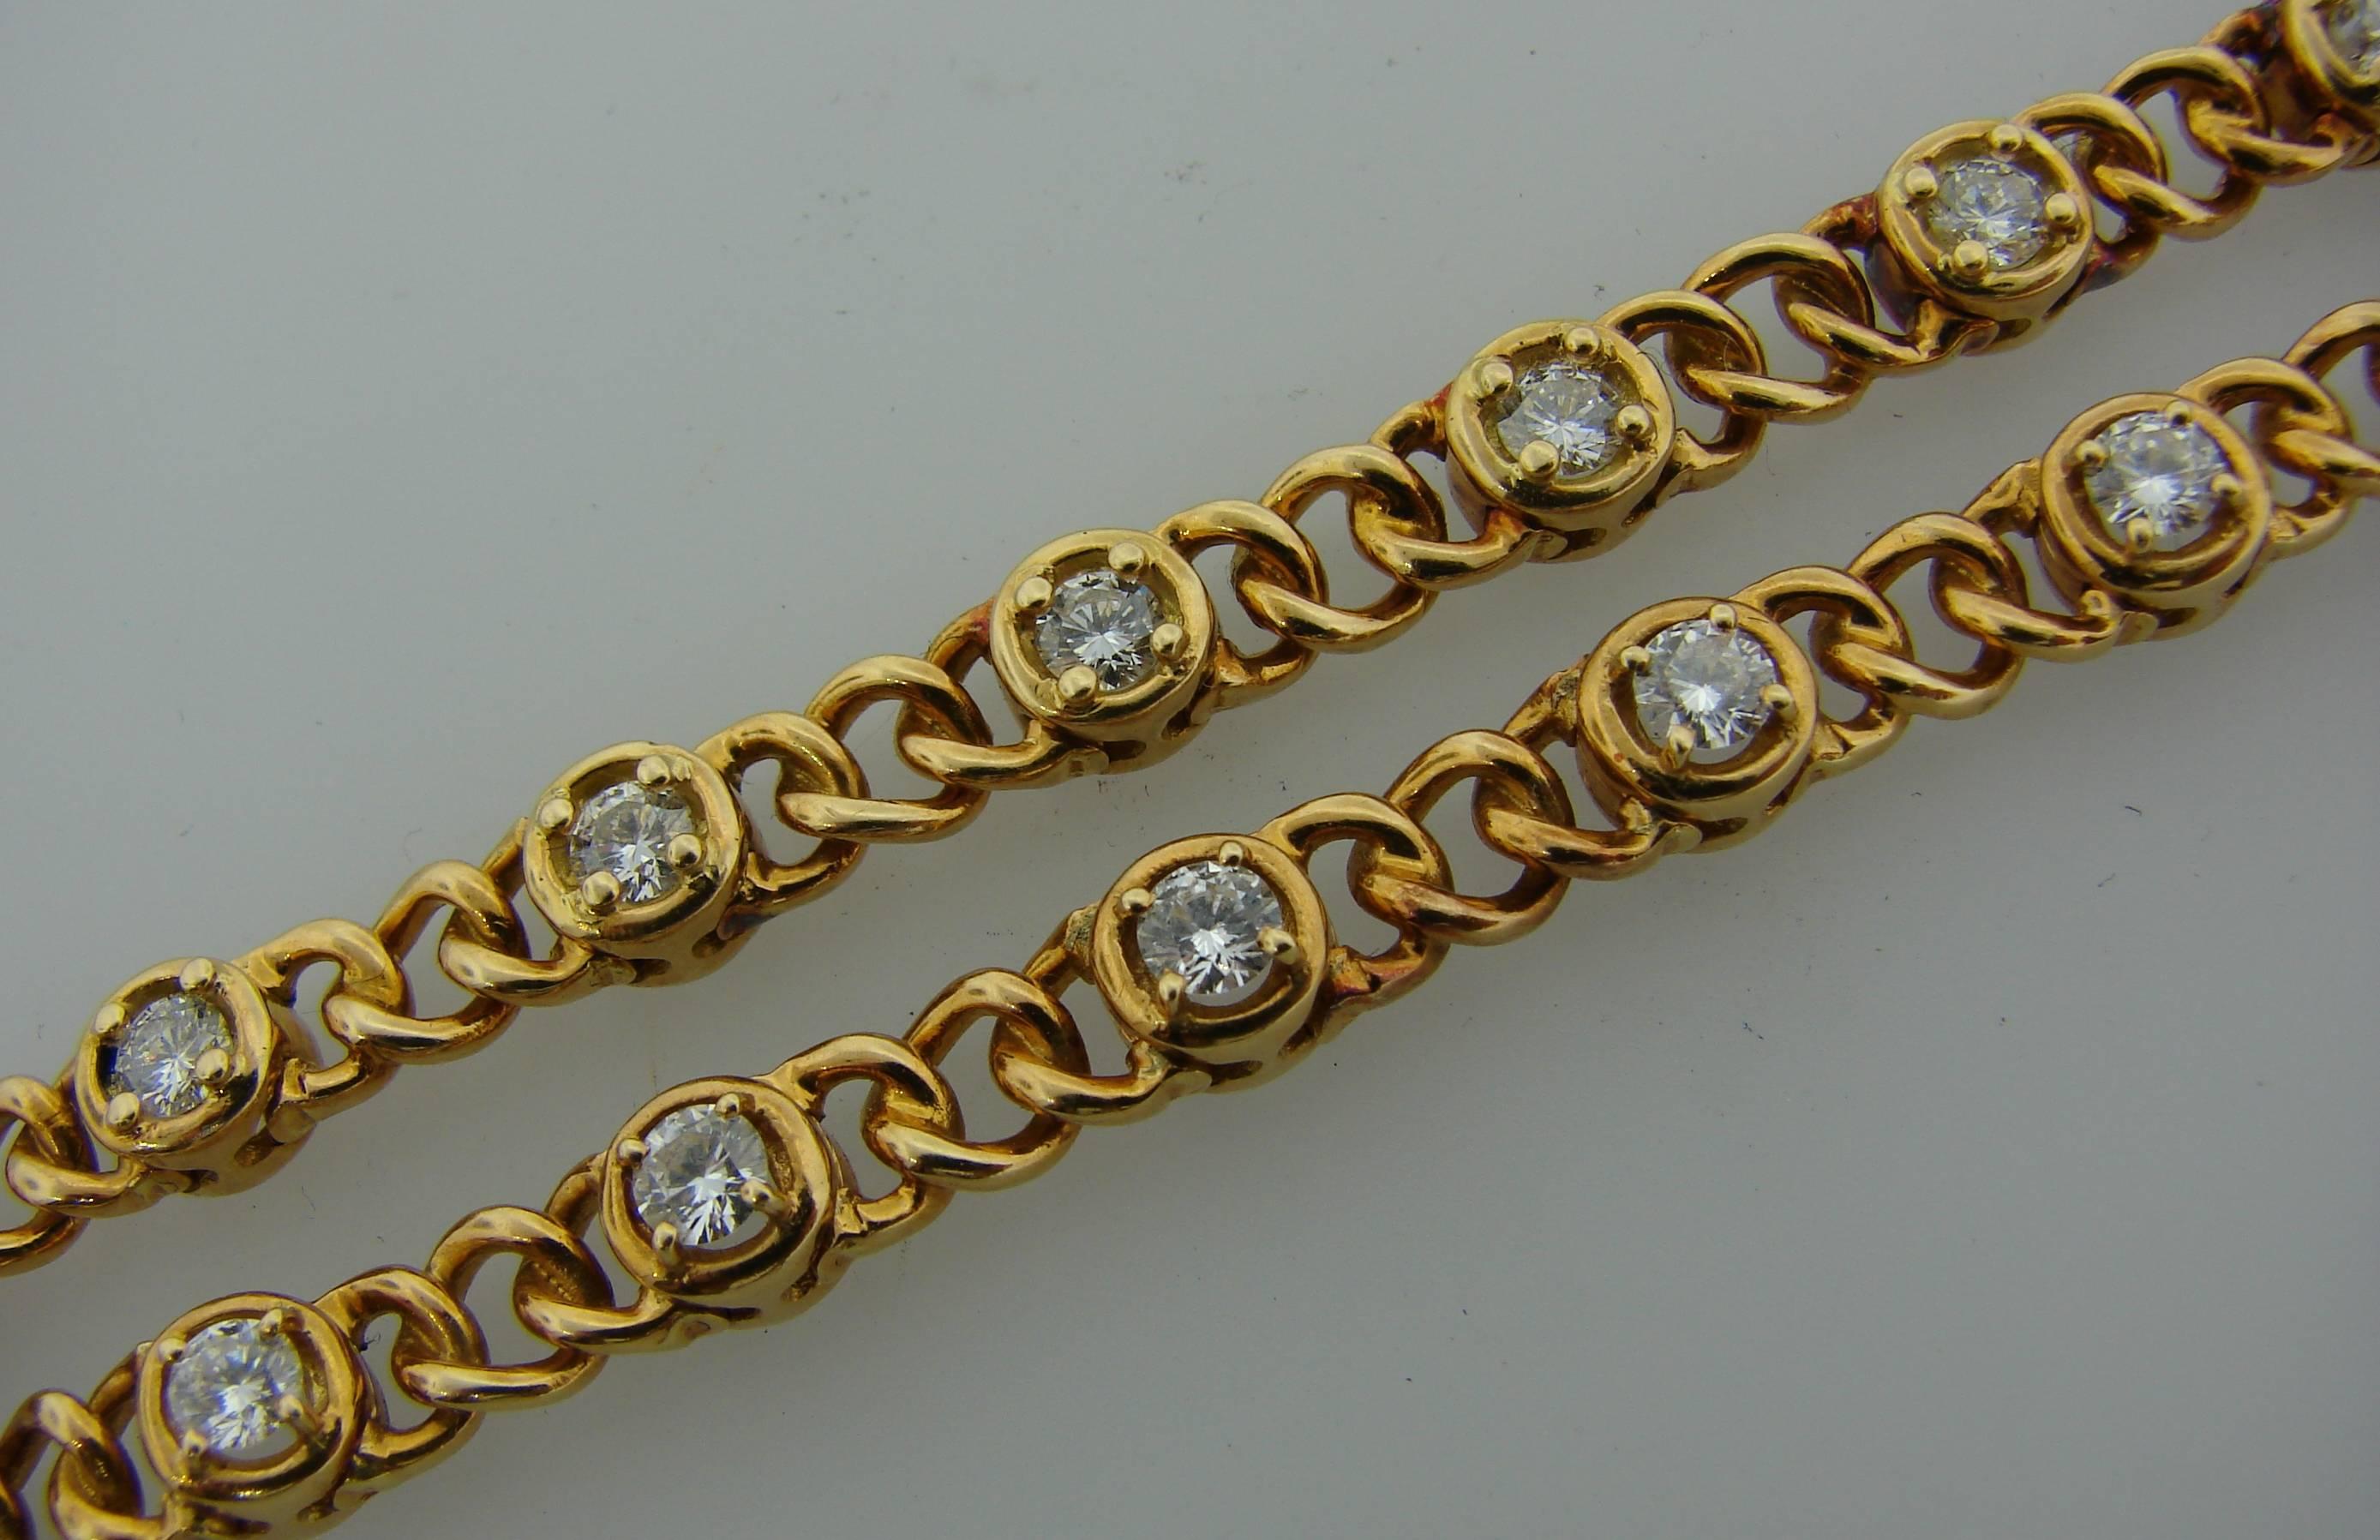 Feminine wearable pair of bracelets created by Van Cleef & Arpels in France in the 1980's. It is made of 18k yellow gold (French hallmarks for 18k gold) and set with twenty eight round brilliant cut diamonds. The diamonds are F color VS1 clarity,